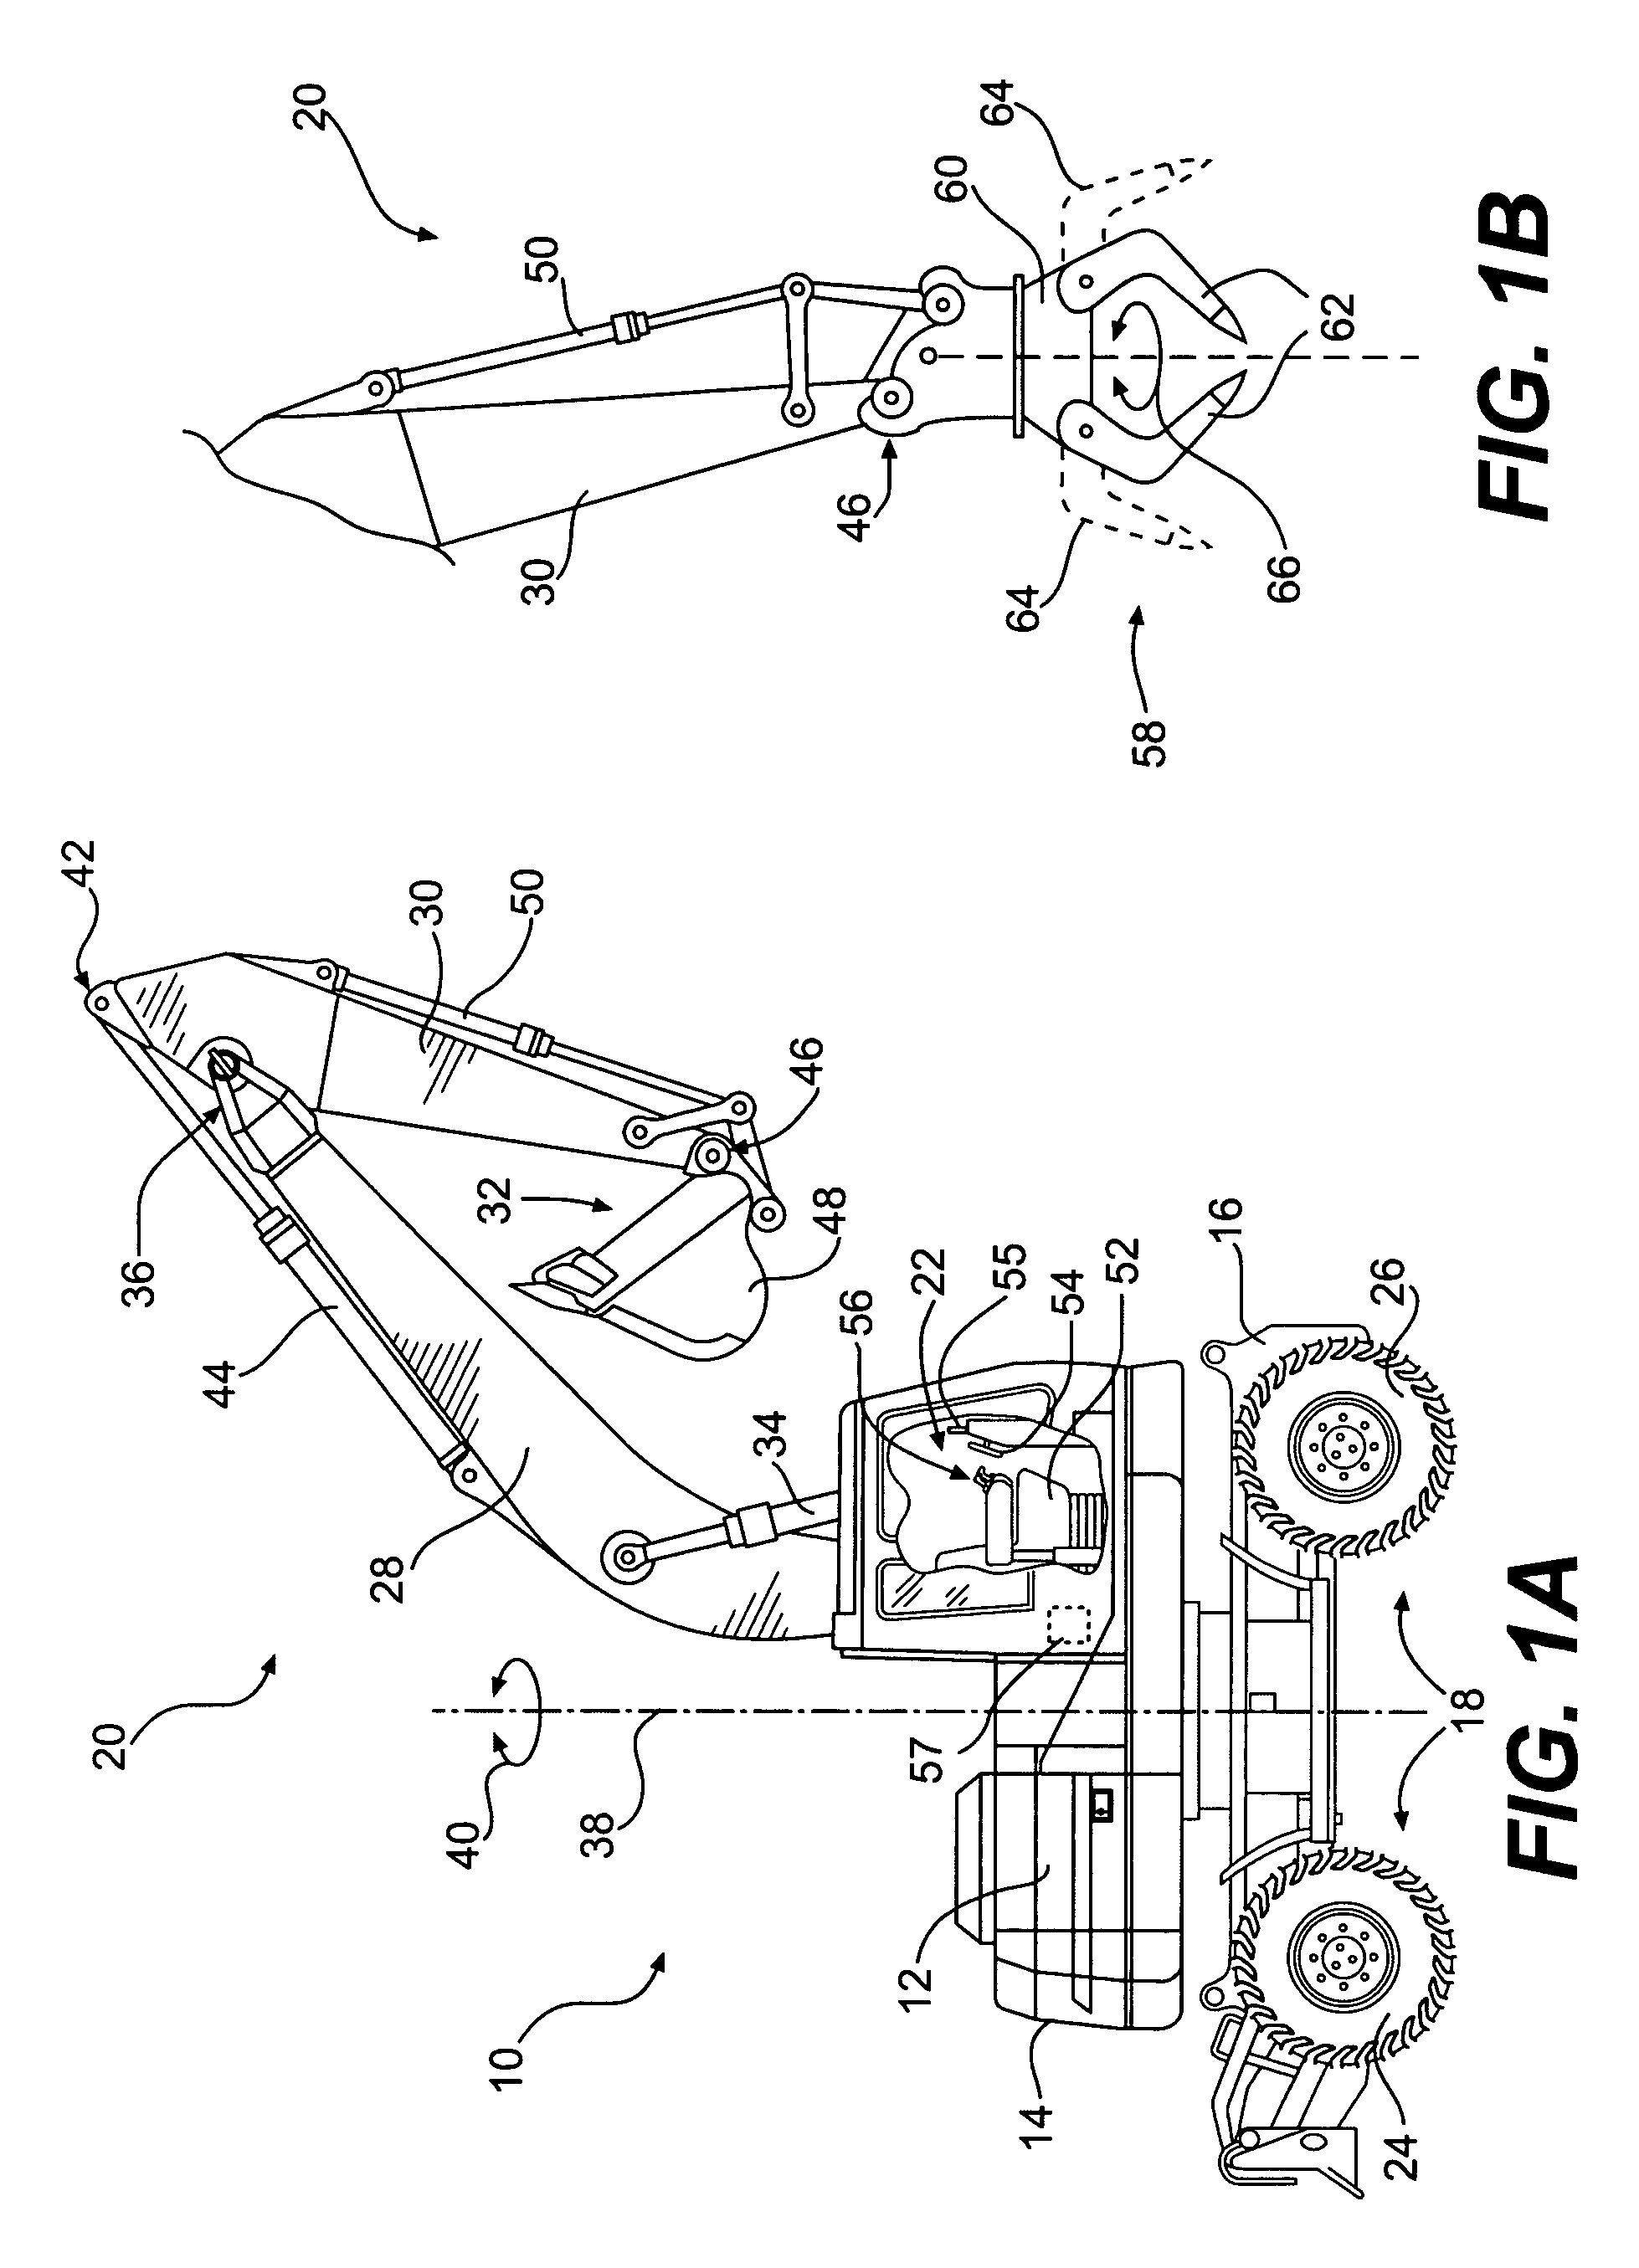 Steering system with joystick mounted controls